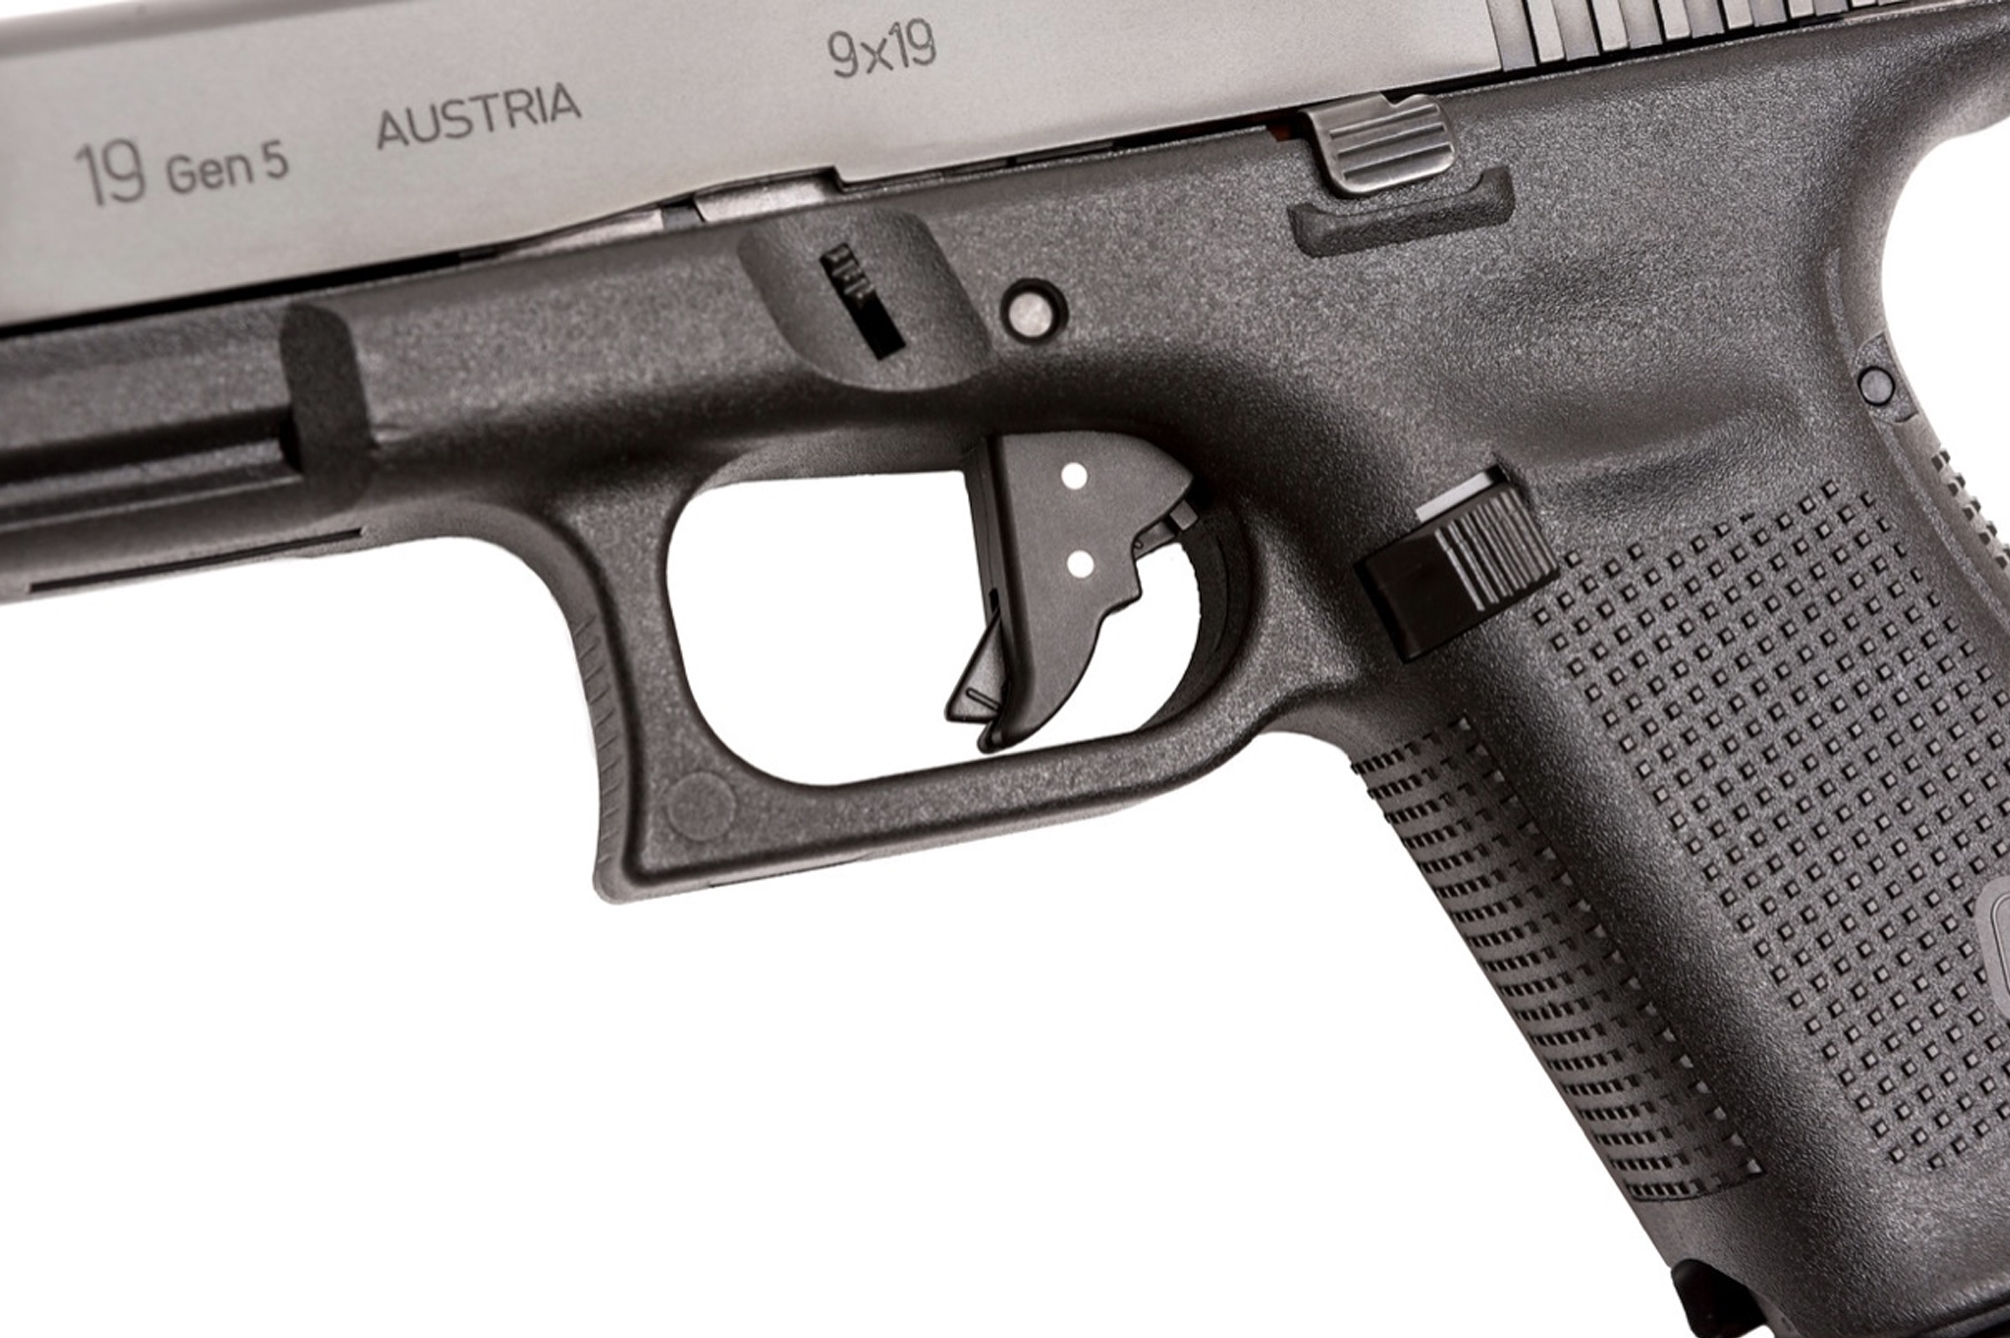 TANGO DOWN BLACK FOR GLOCK MODEL 42 TACTICAL MAGAZINE RELEASE